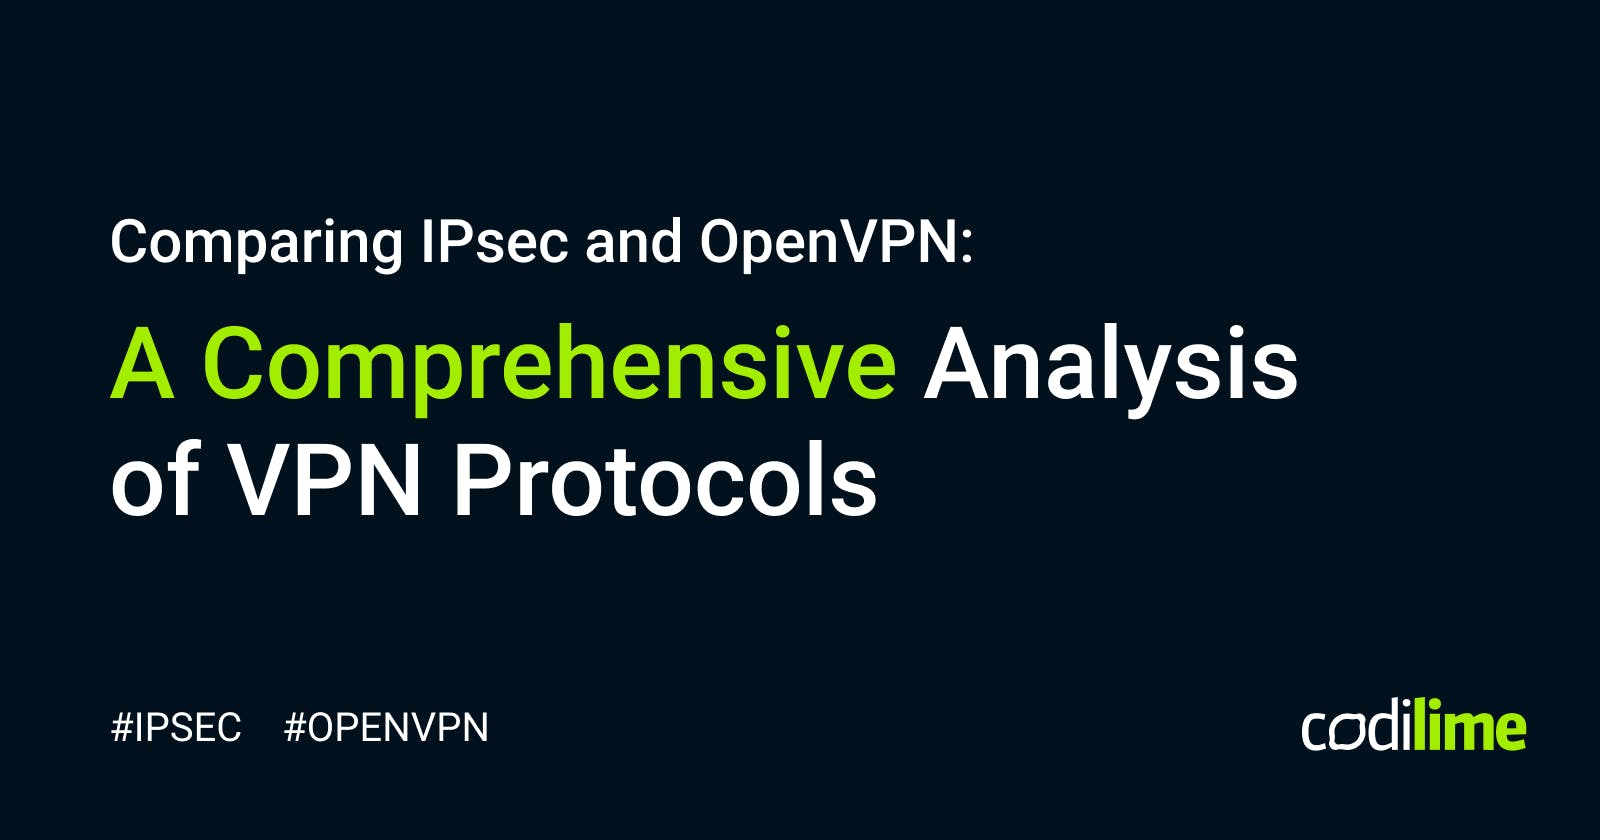 Comparing IPsec and OpenVPN: A Comprehensive Analysis of VPN Protocols